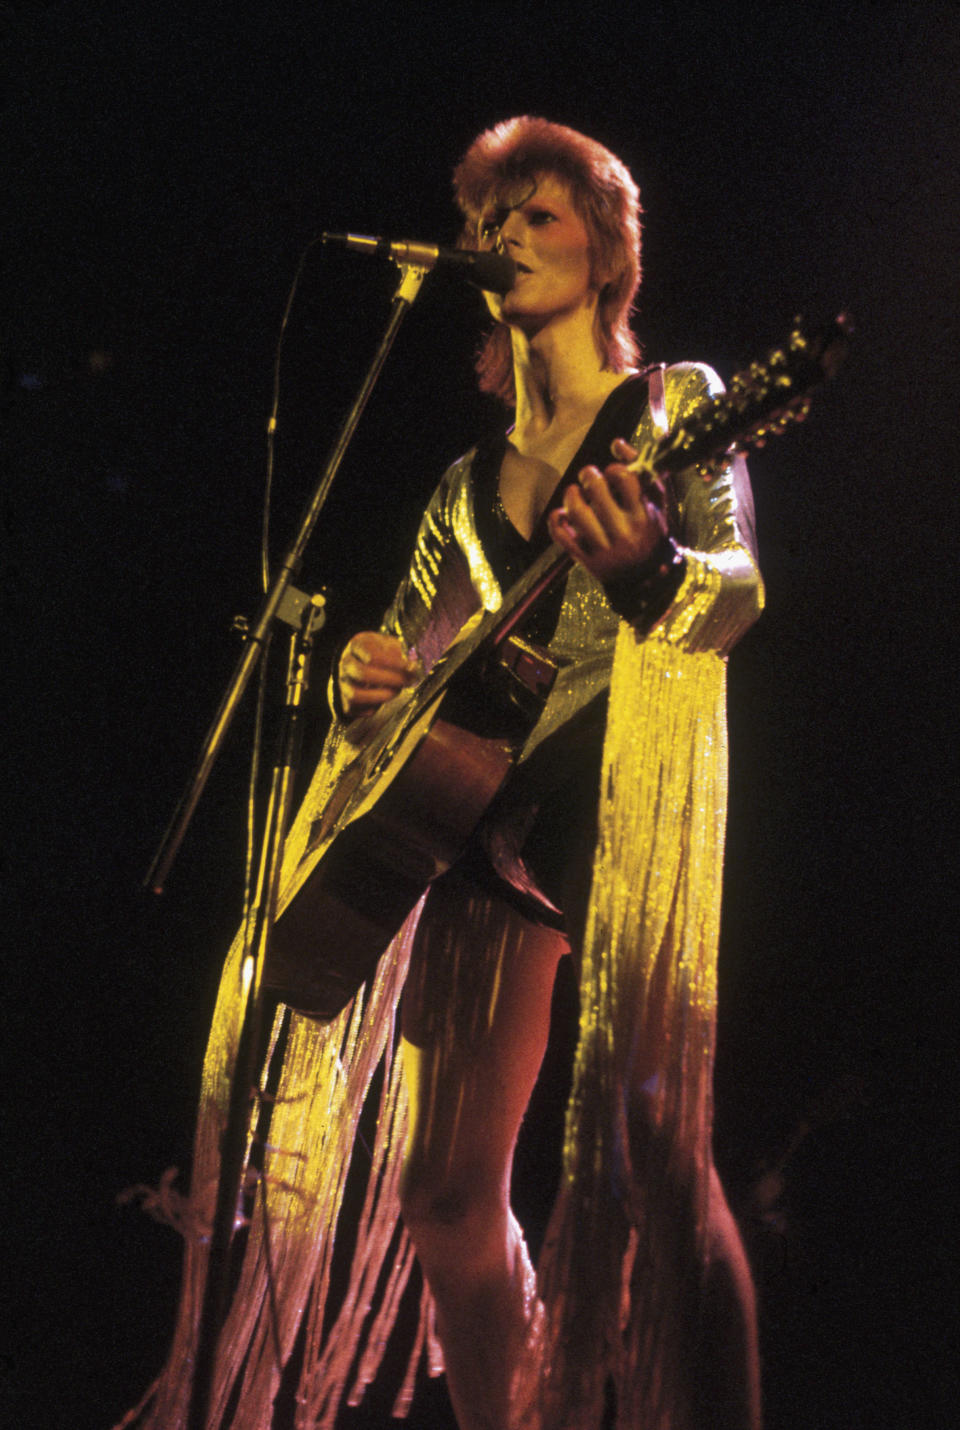 David Bowie performing as Ziggy Stardust at the Hammersmith Odeon, 1973. He is wearing a silver costume with gold tassels by Japanese designer Kansai Yamamoto. (Photo by Debi Doss/Hulton Archive/Getty Images)   